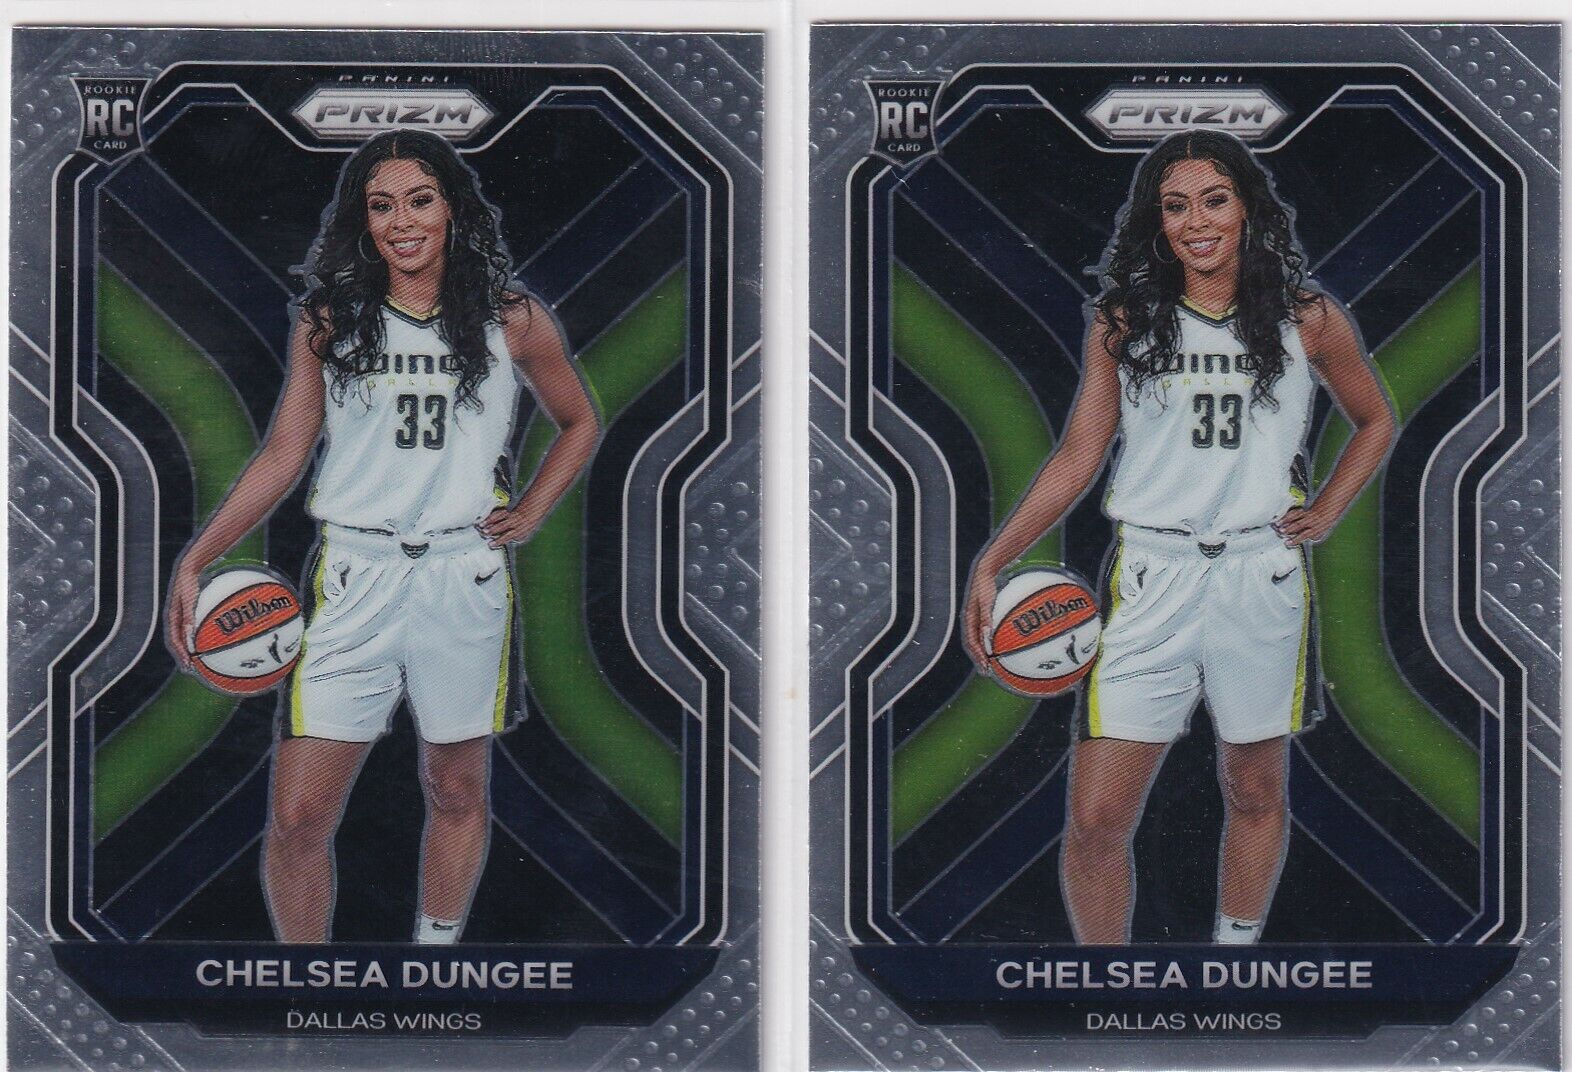 2021 PANINI WNBA PRIZM ROOKIE LOT #93 DALLAS WINGS - CHELSEA DUNGEE x2